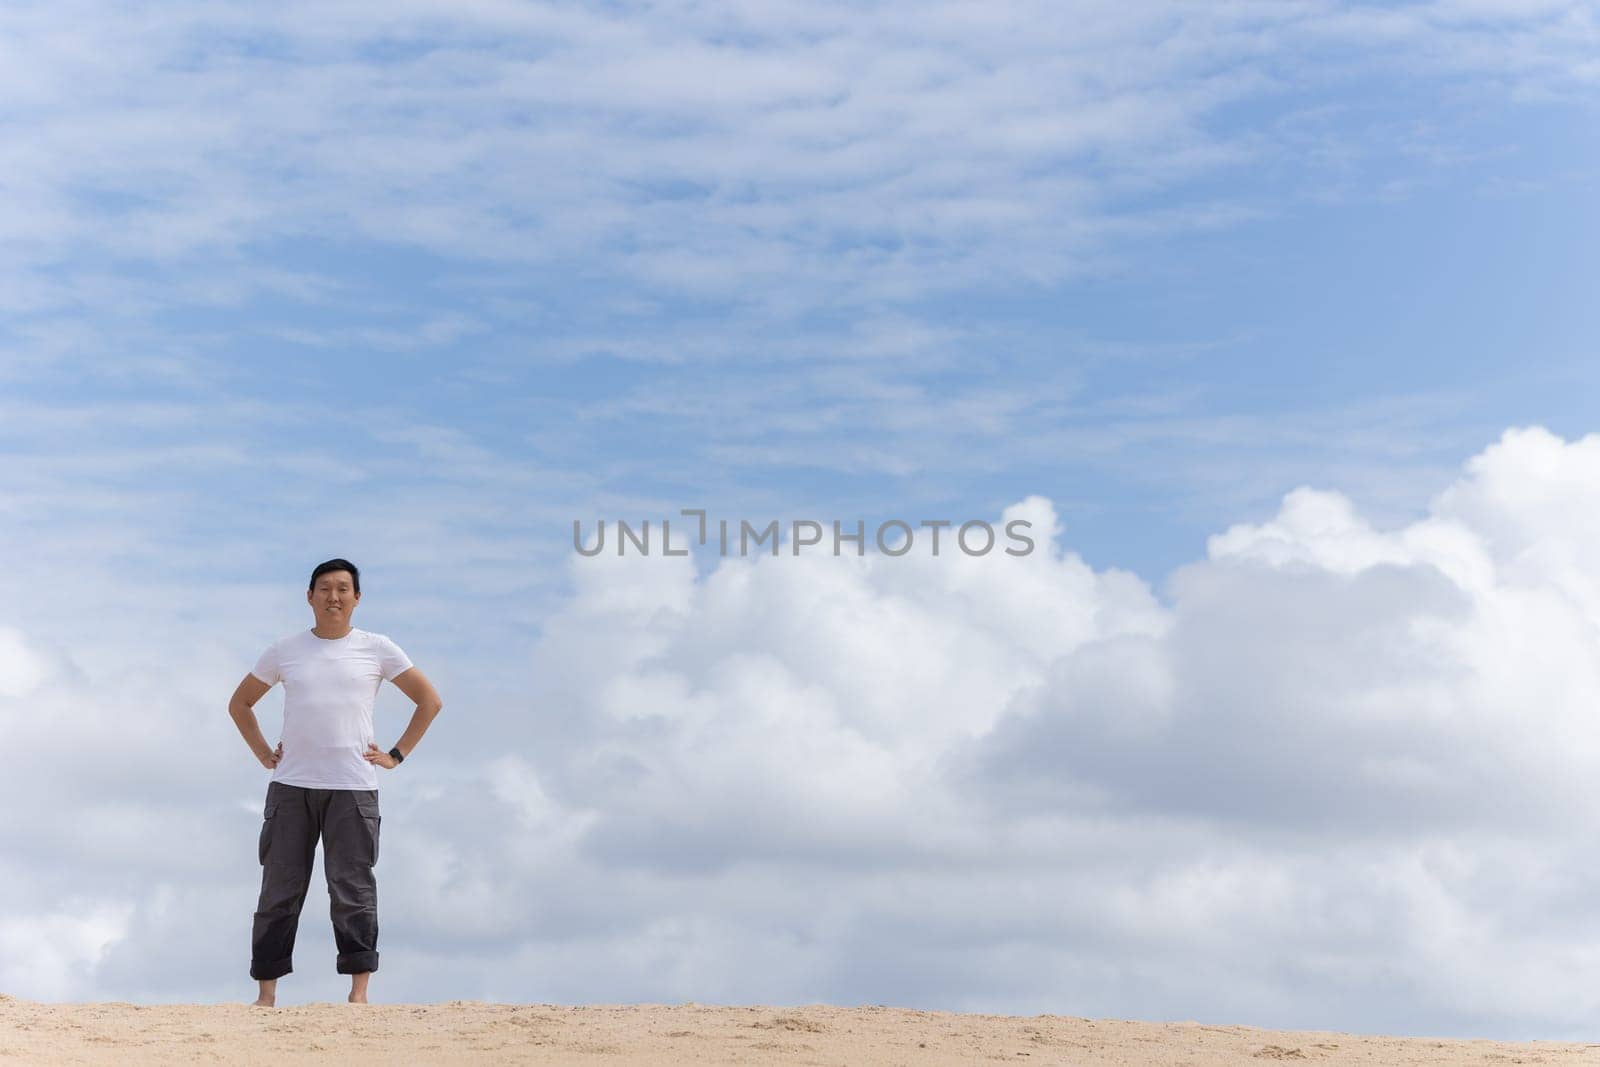 A woman stands on a beach with a cloudy sky in the background by Studia72